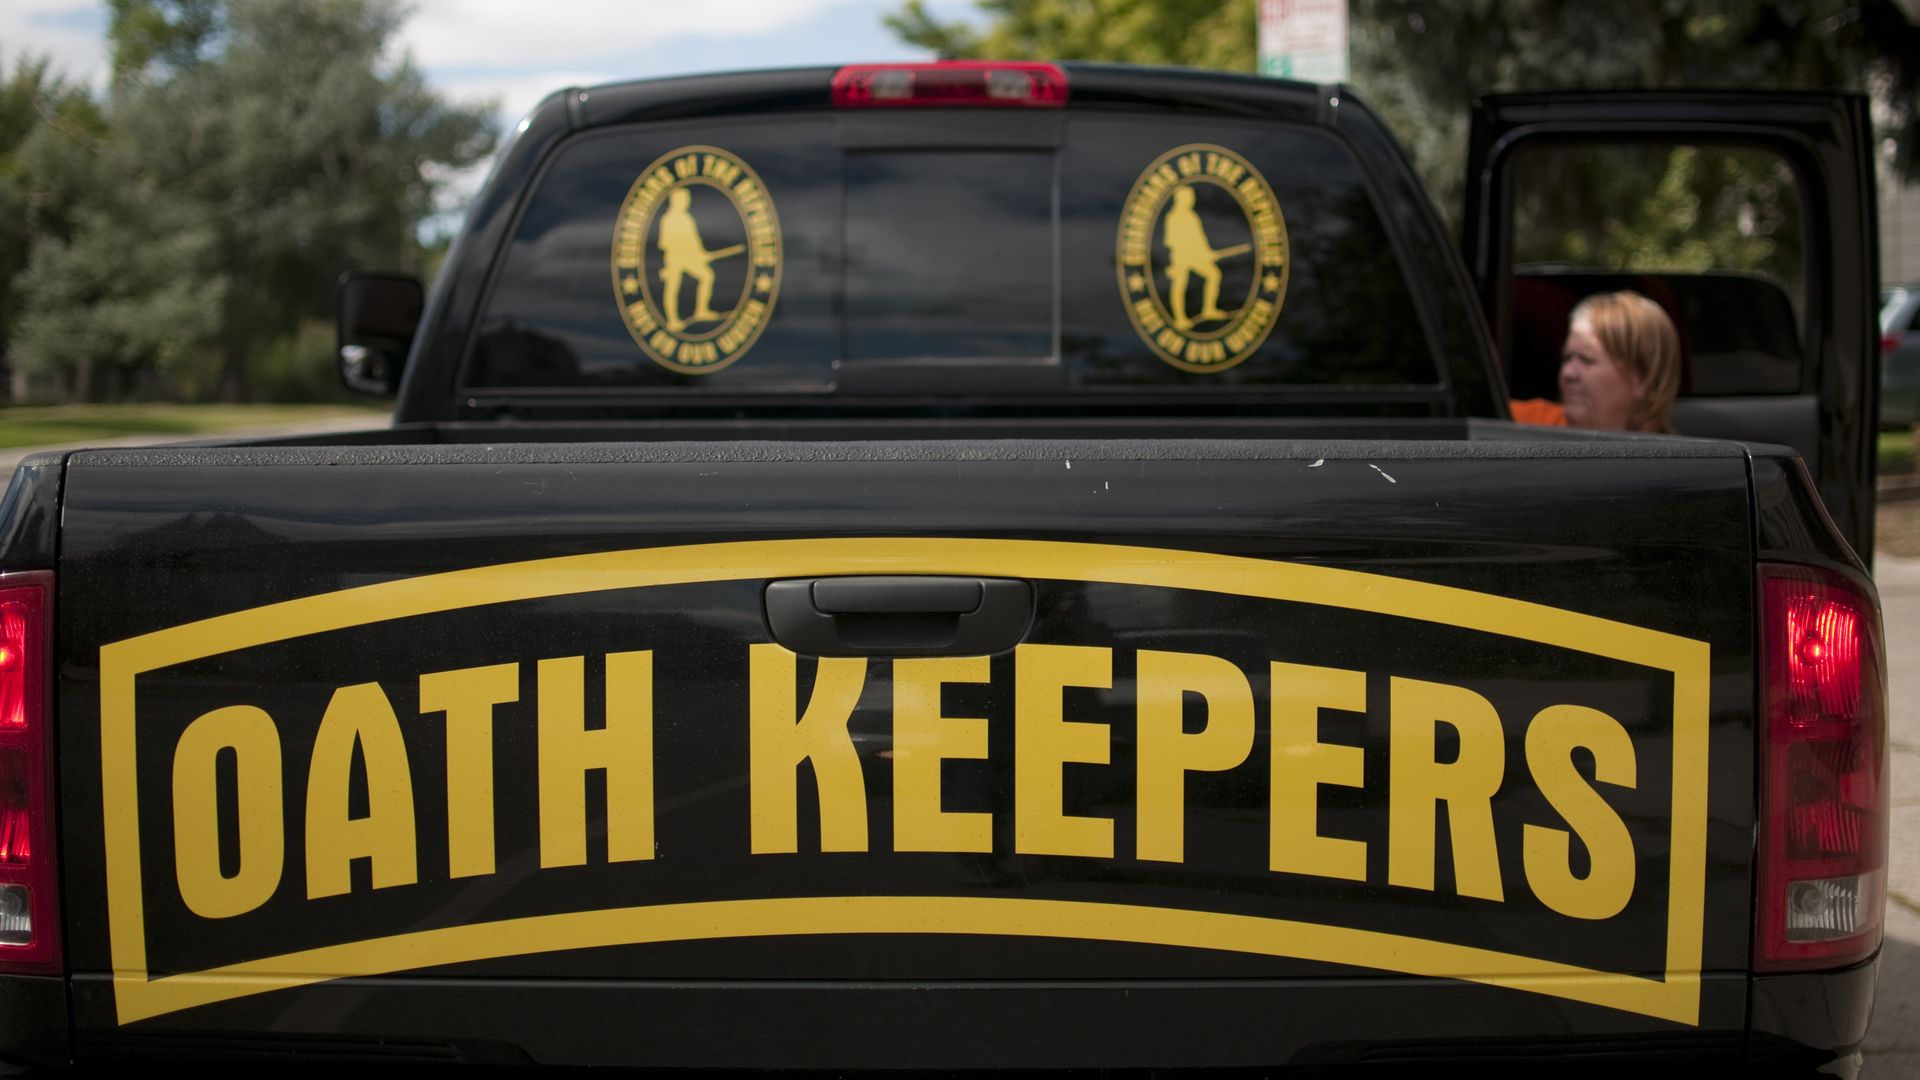 A pickup tuck that says "oath keeper" on the back